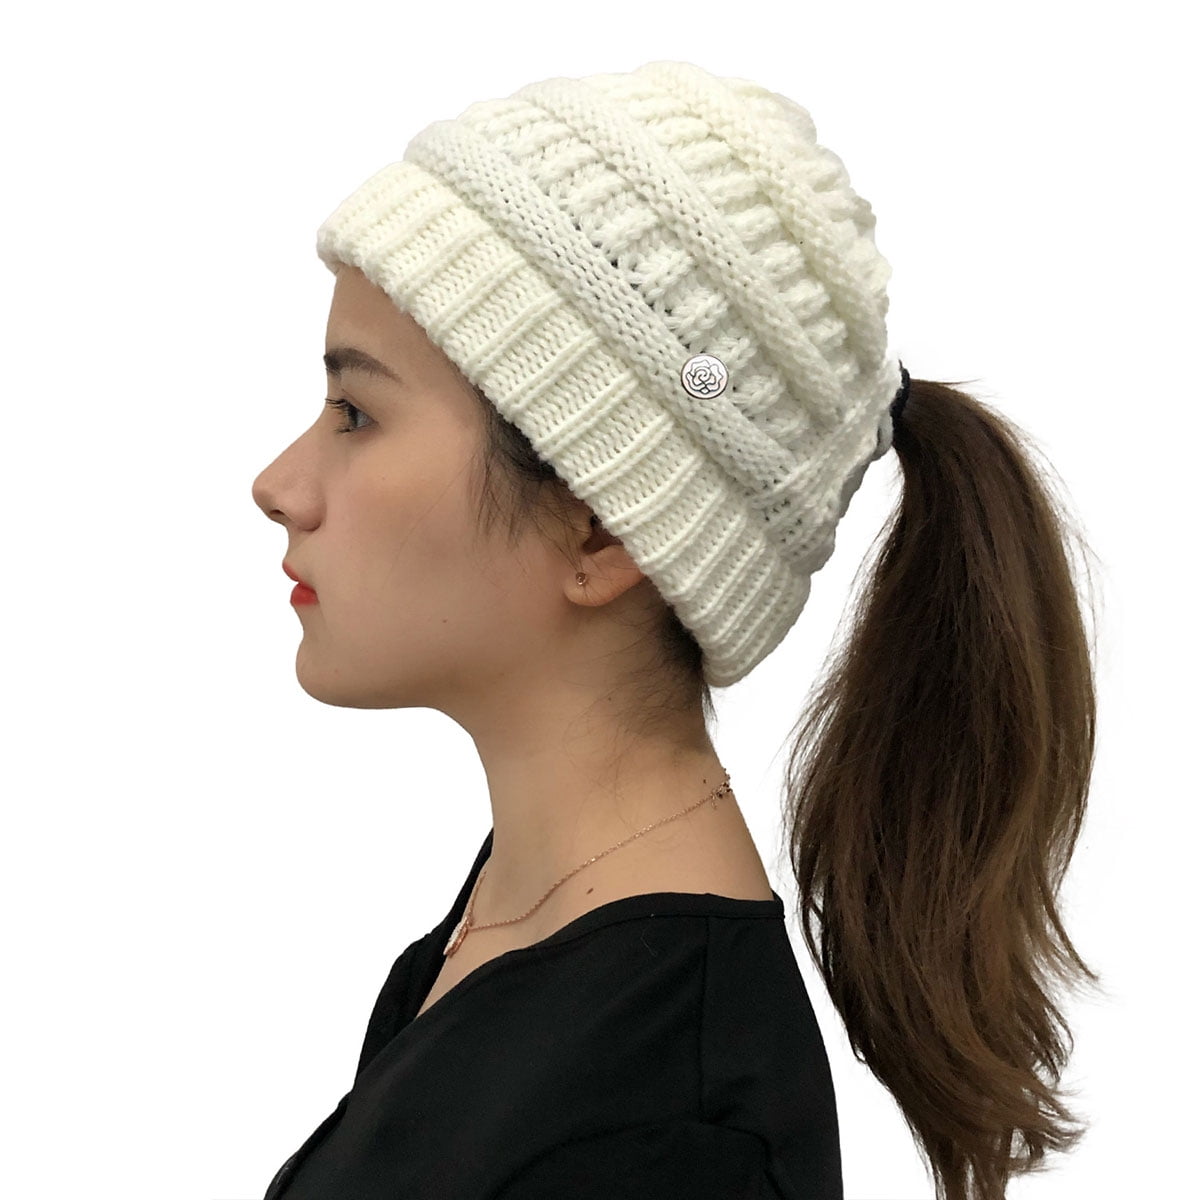 Ponytail hat hand knit. Knitted winter warm ponytail hat